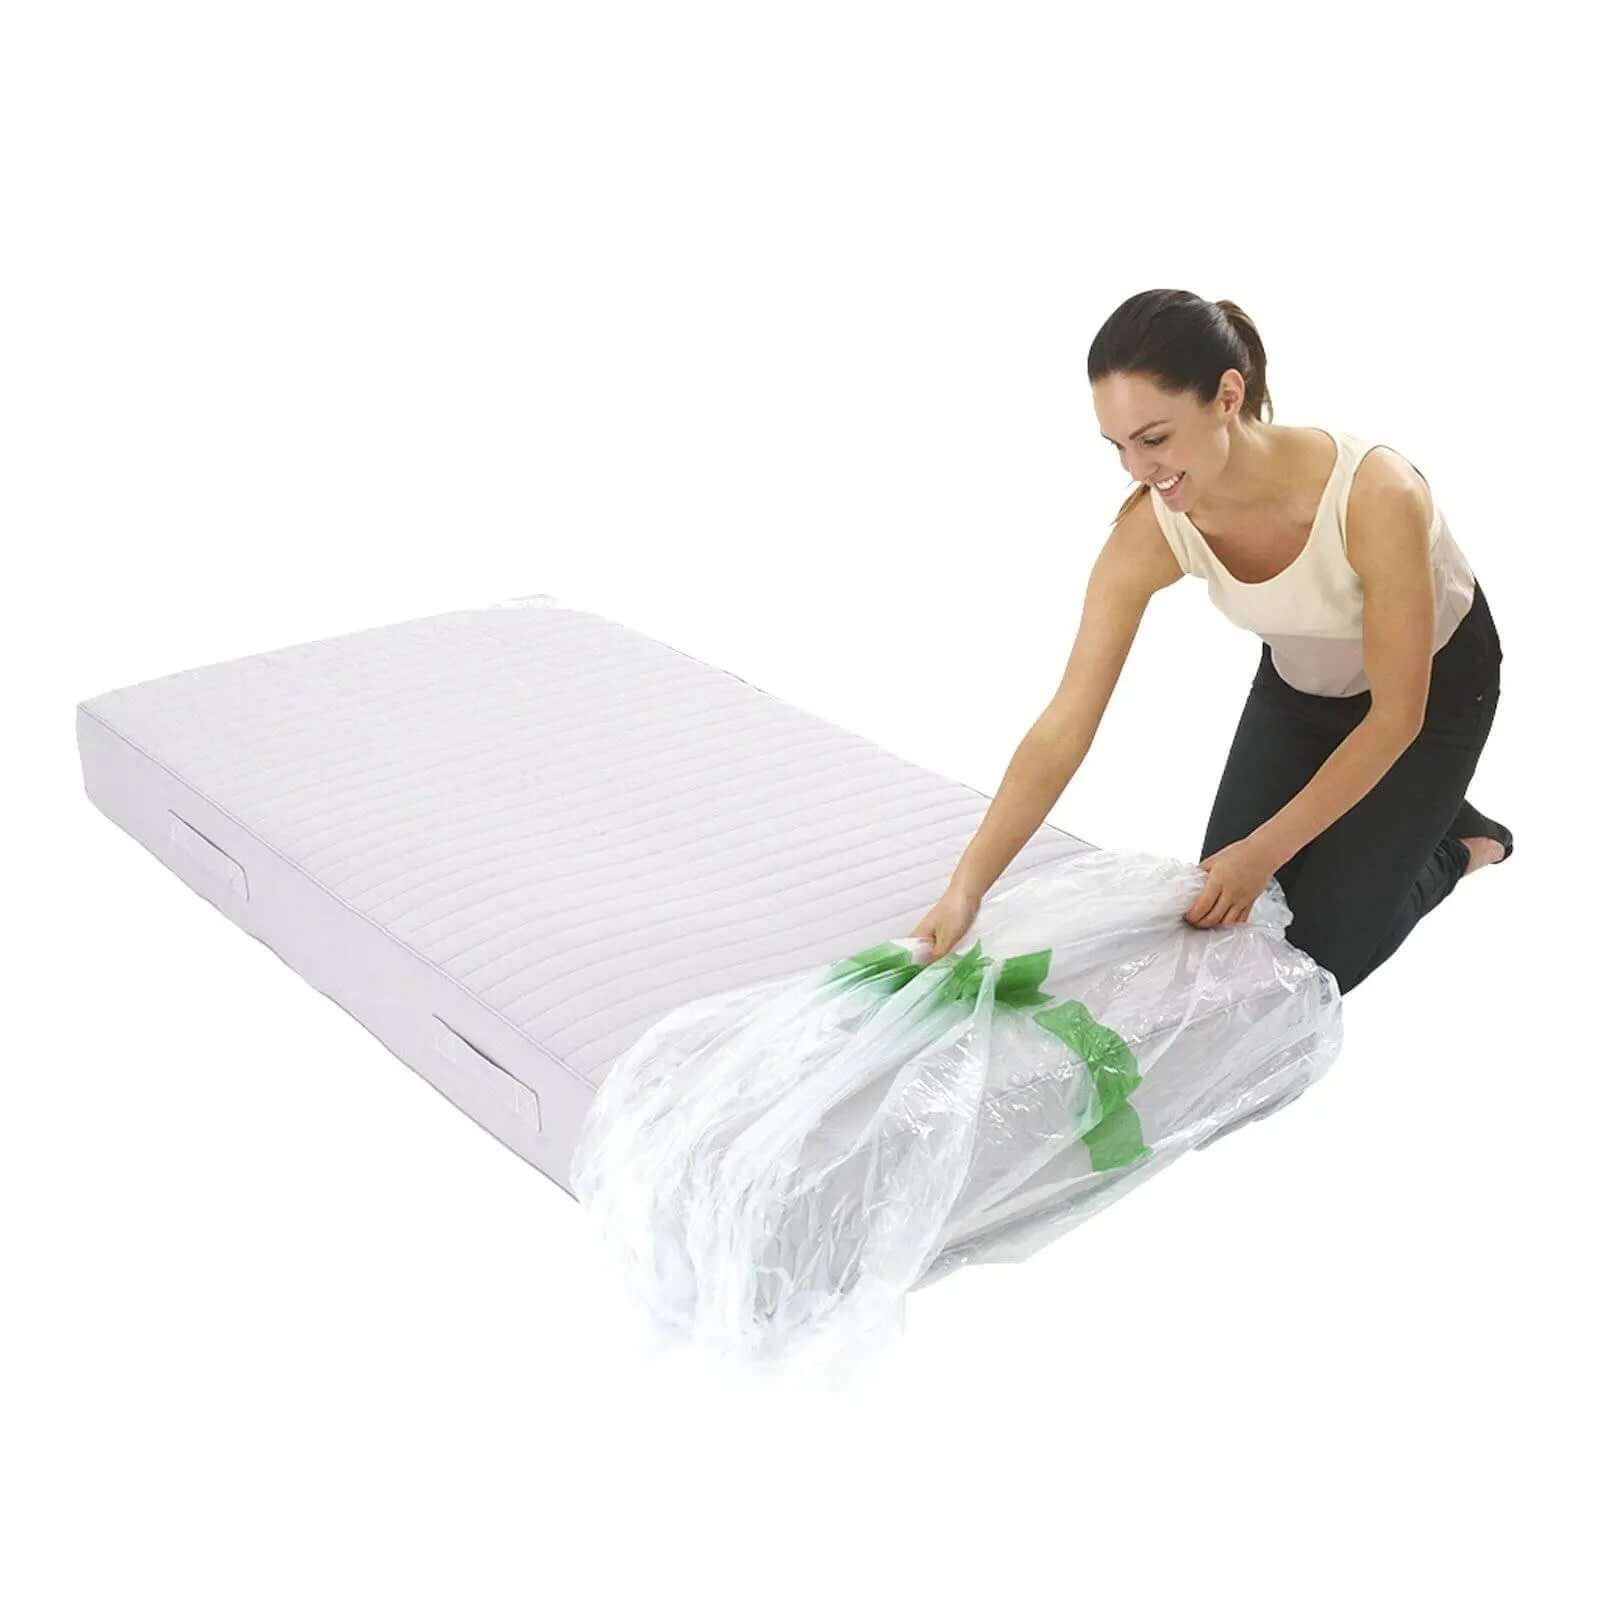 Heavy Duty Mattress Cover for Moving and Storage   Storage Bags and Covers Packstore Australia Packstore